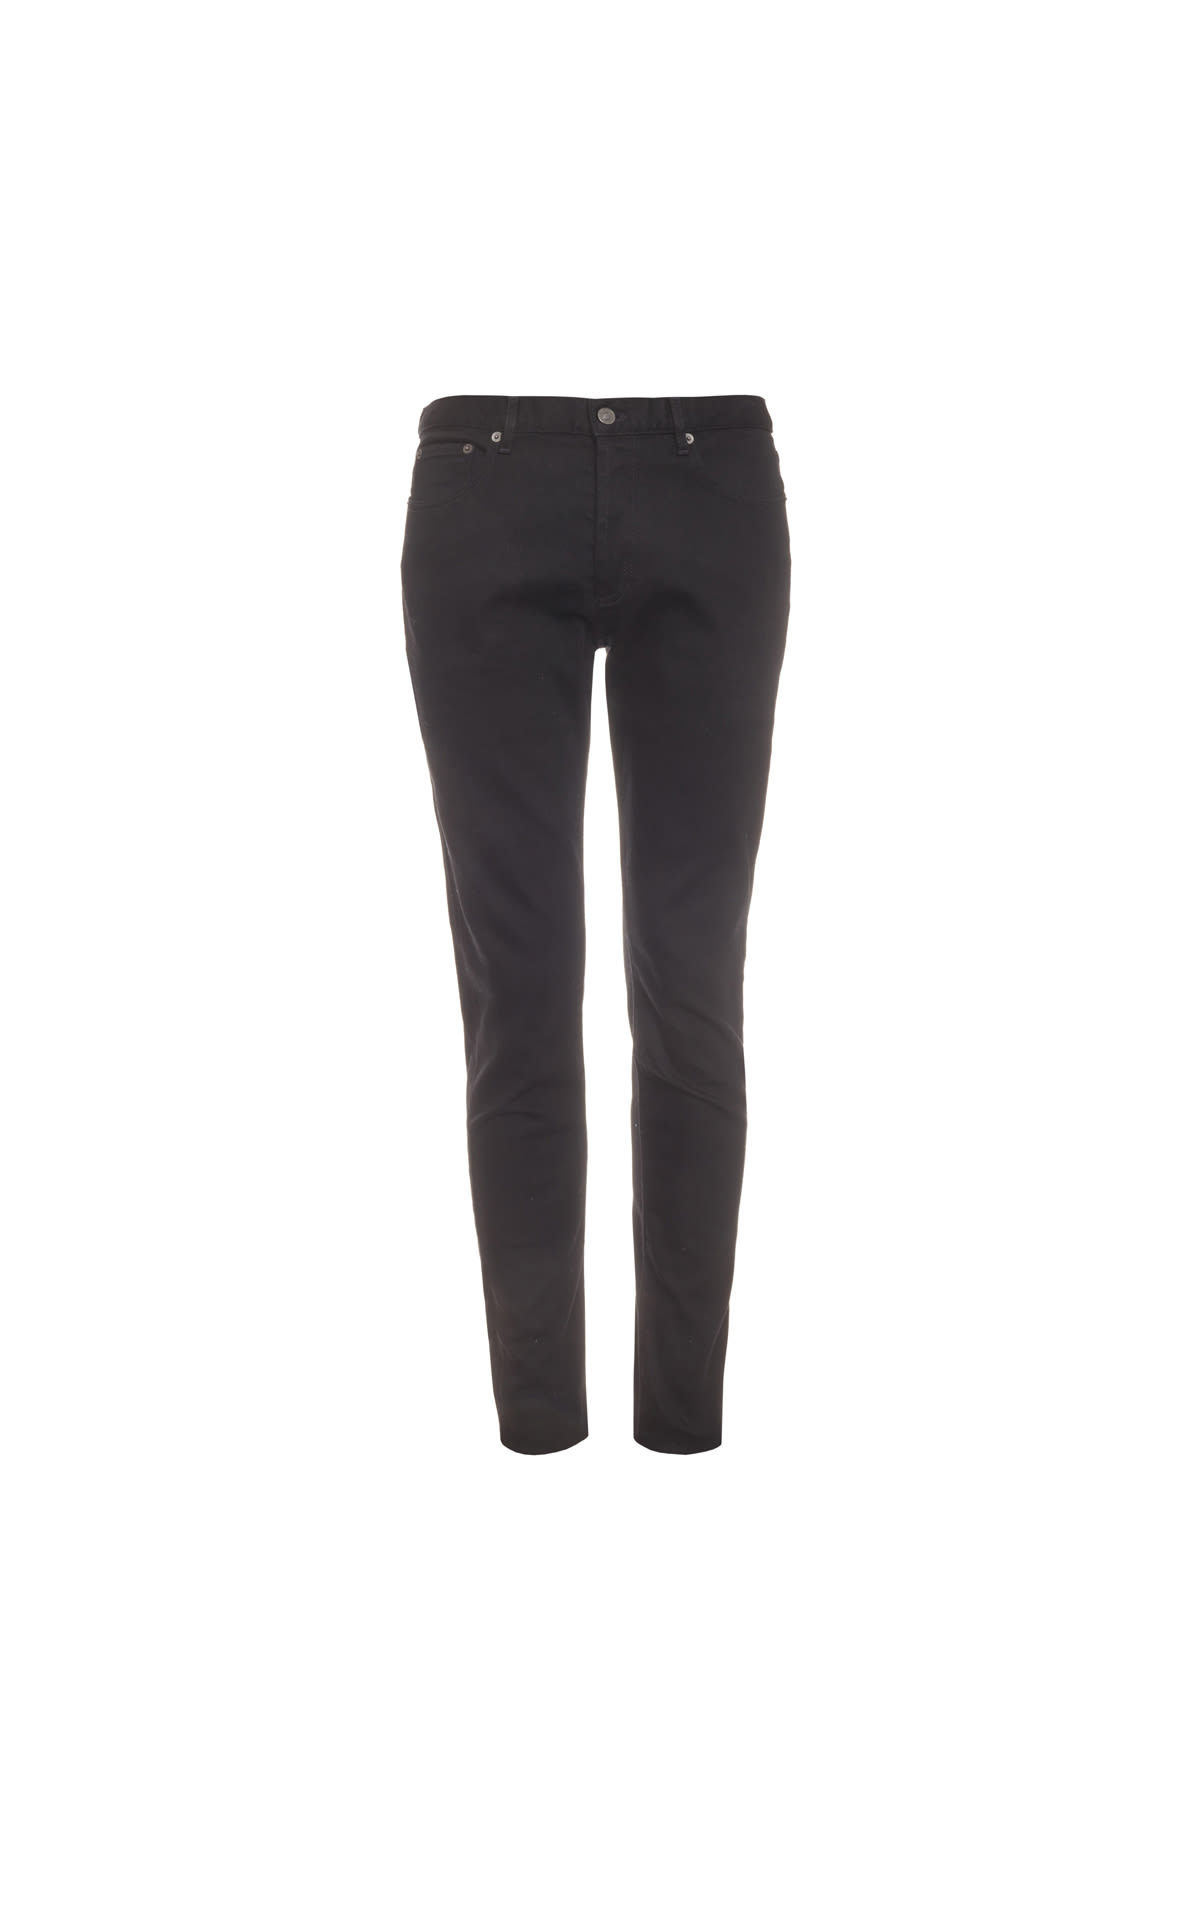 Givenchy Skinny black trousers from Bicester Village